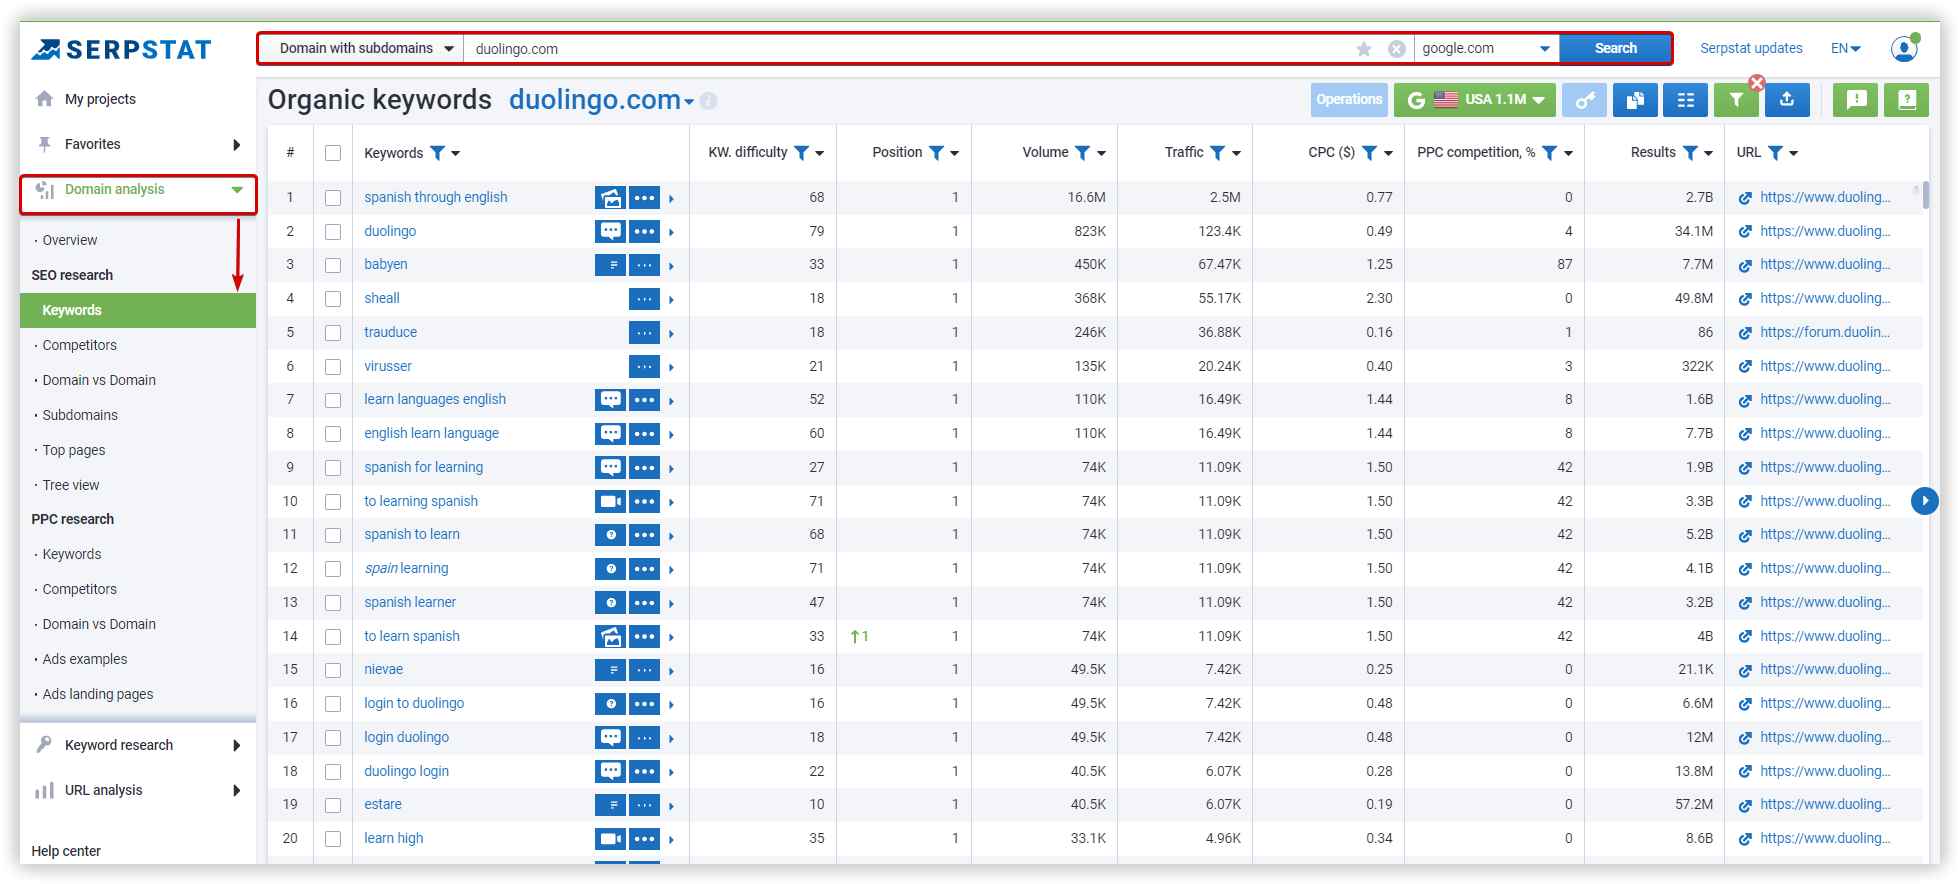 Search for competitor keywords with Serpstat